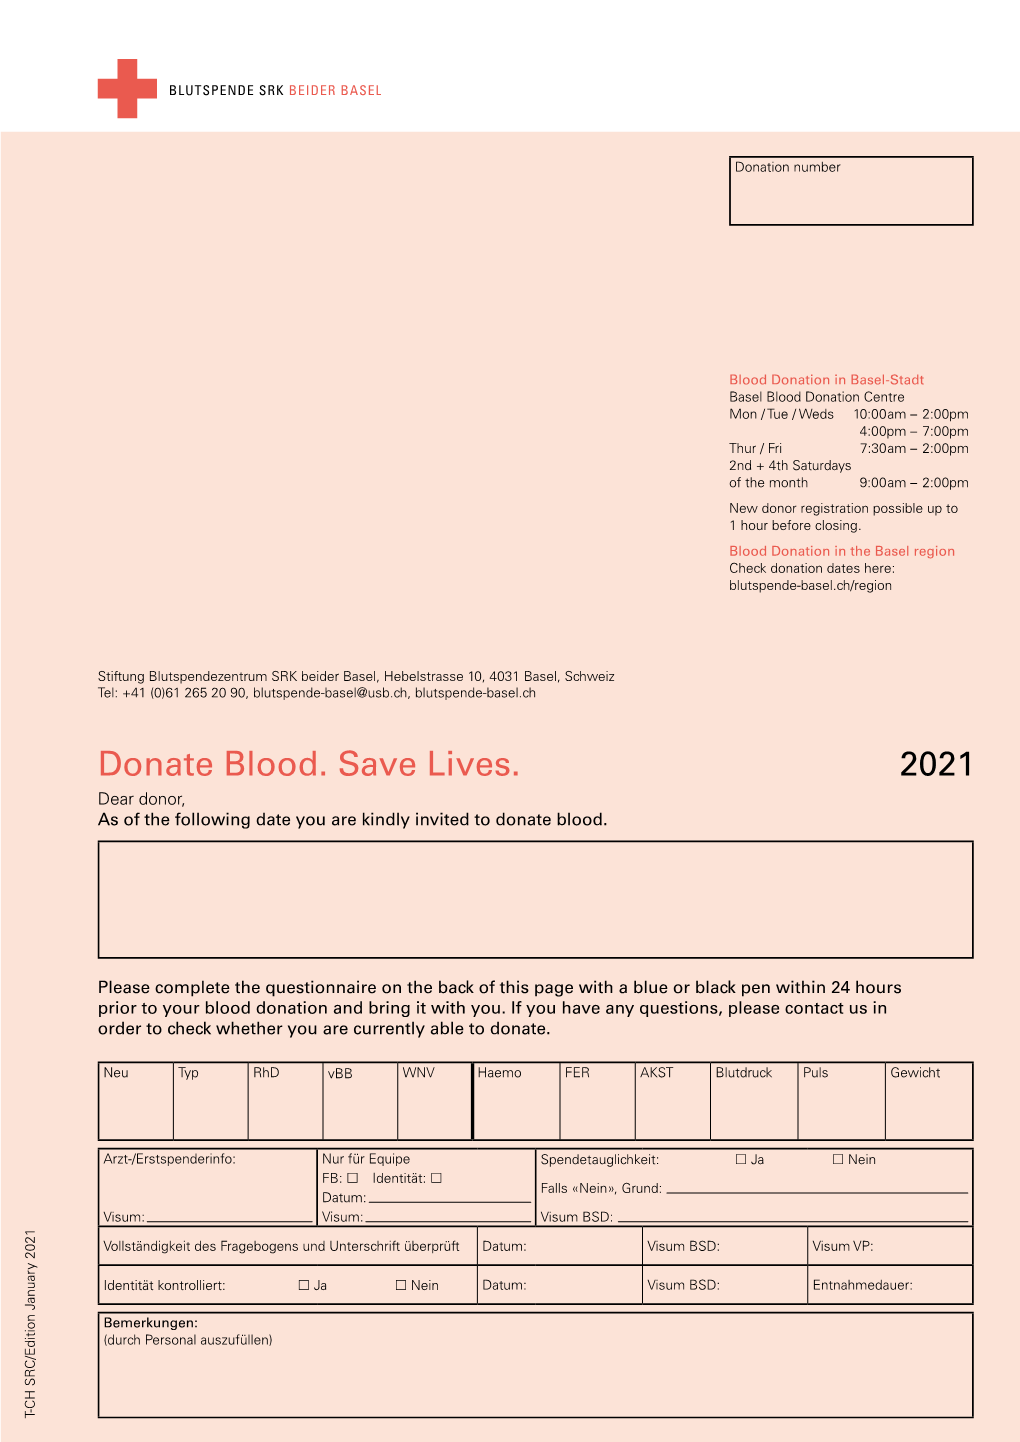 Donate Blood. Save Lives. 2021 Dear Donor, As of the Following Date You Are Kindly Invited to Donate Blood